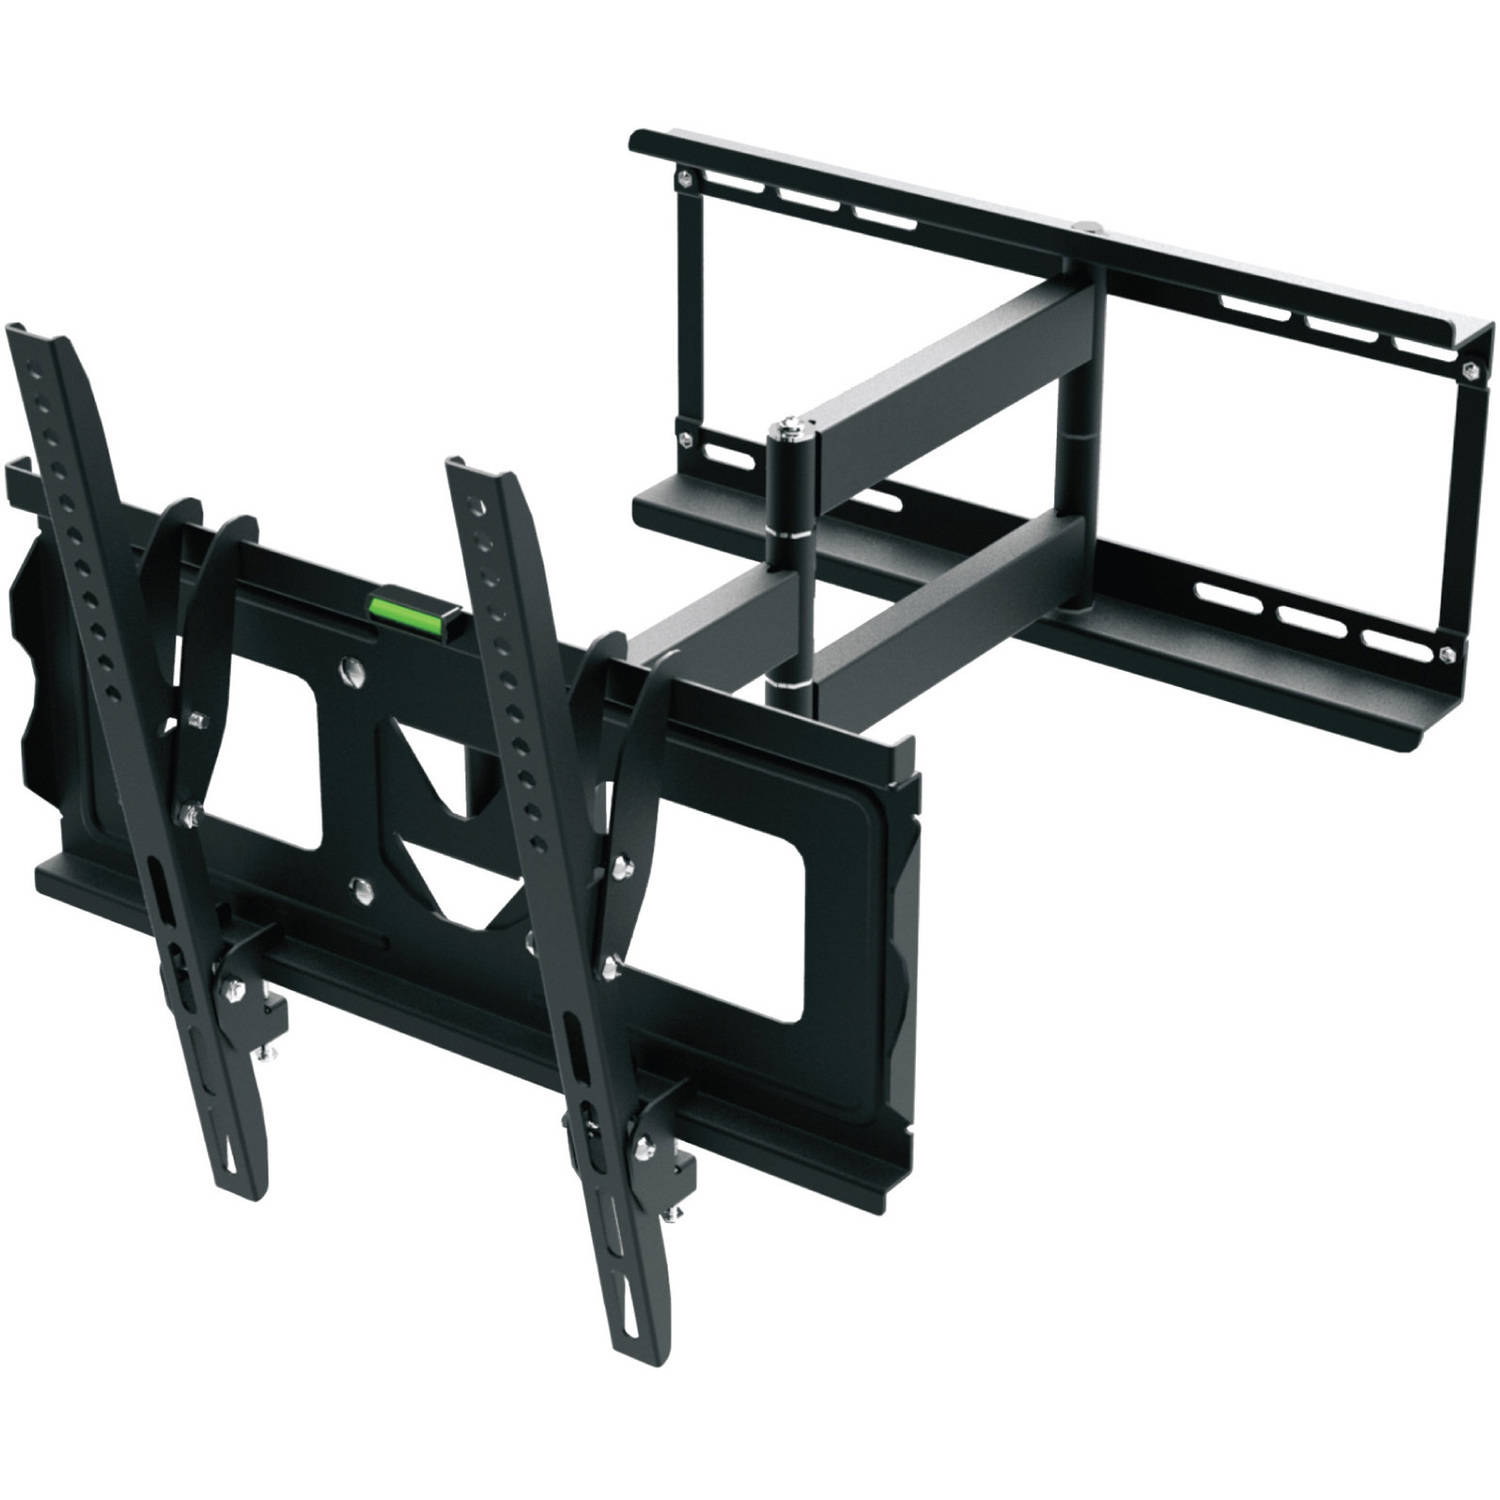 Ematic Full Motion TV Wall Mount Kit with HDMI Cable for 19" - 70" Displays - image 2 of 6